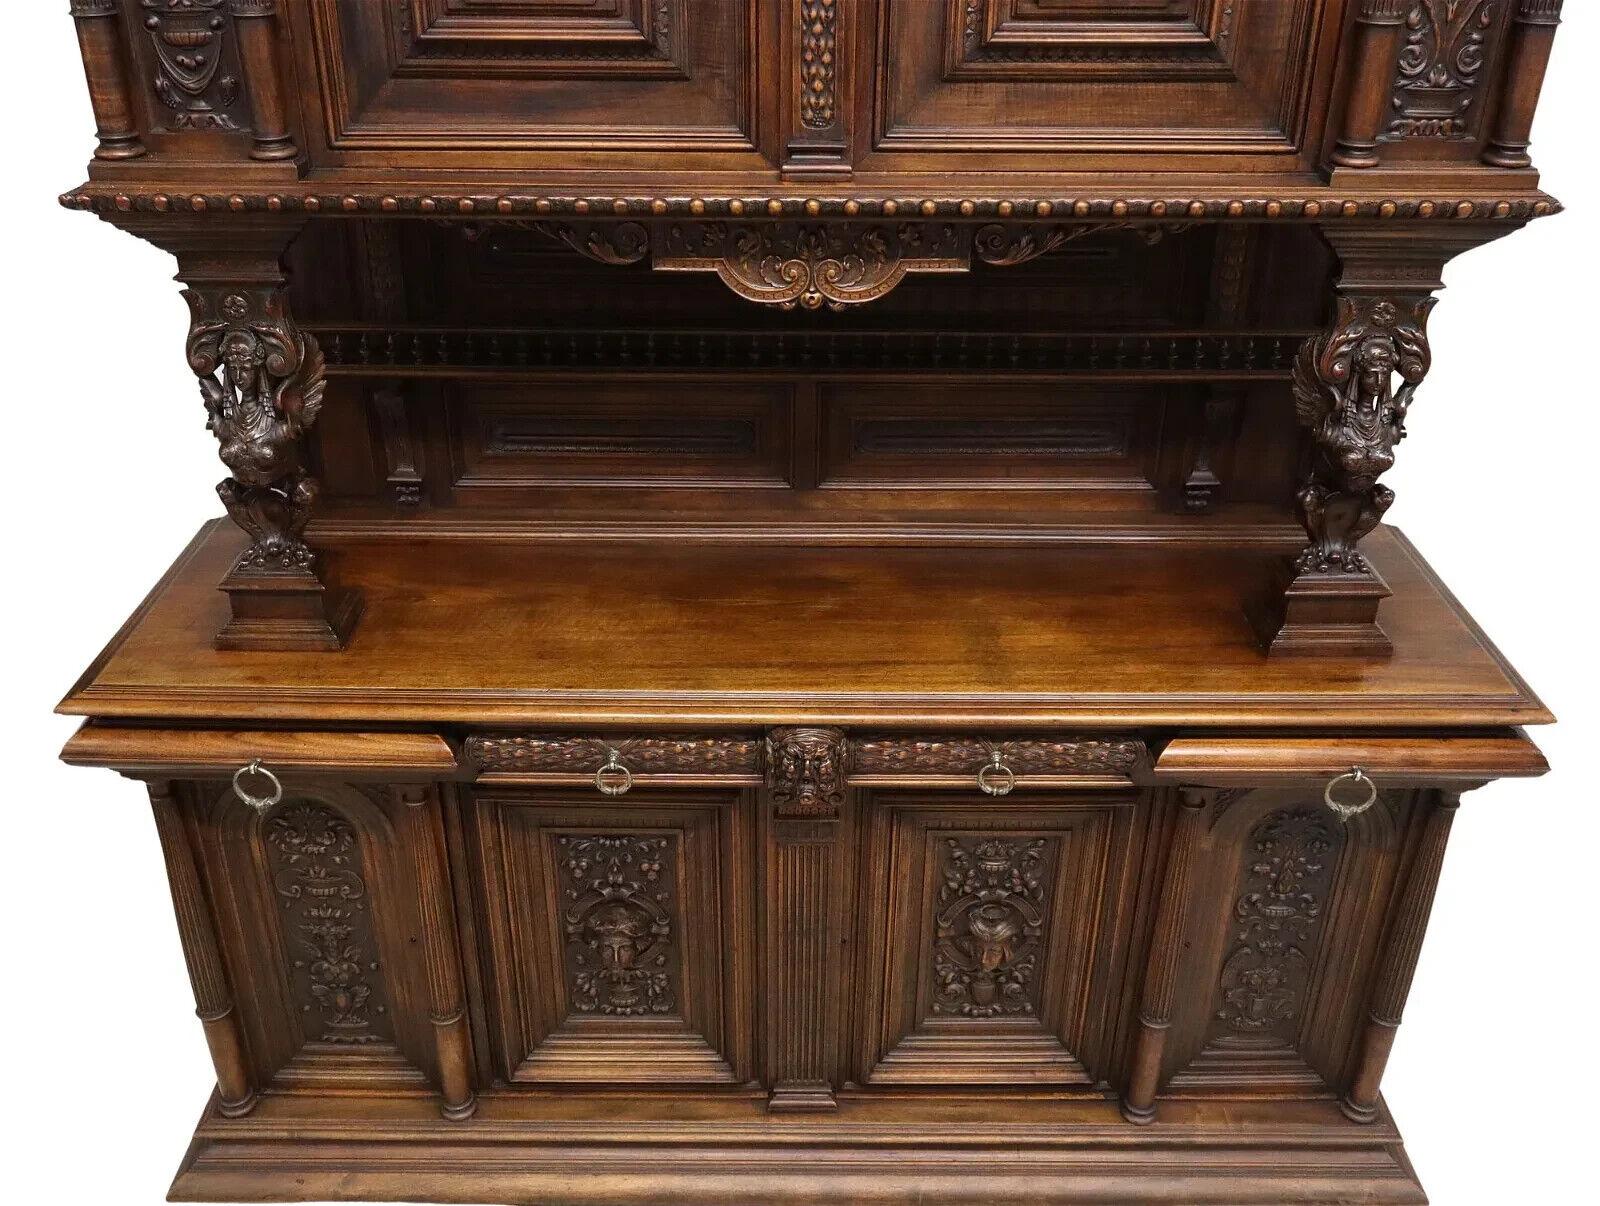 Renaissance Revival 1800s Antique Signed, Chaput, French Ren Revival, Well-Carved Walnut, Sideboard! For Sale